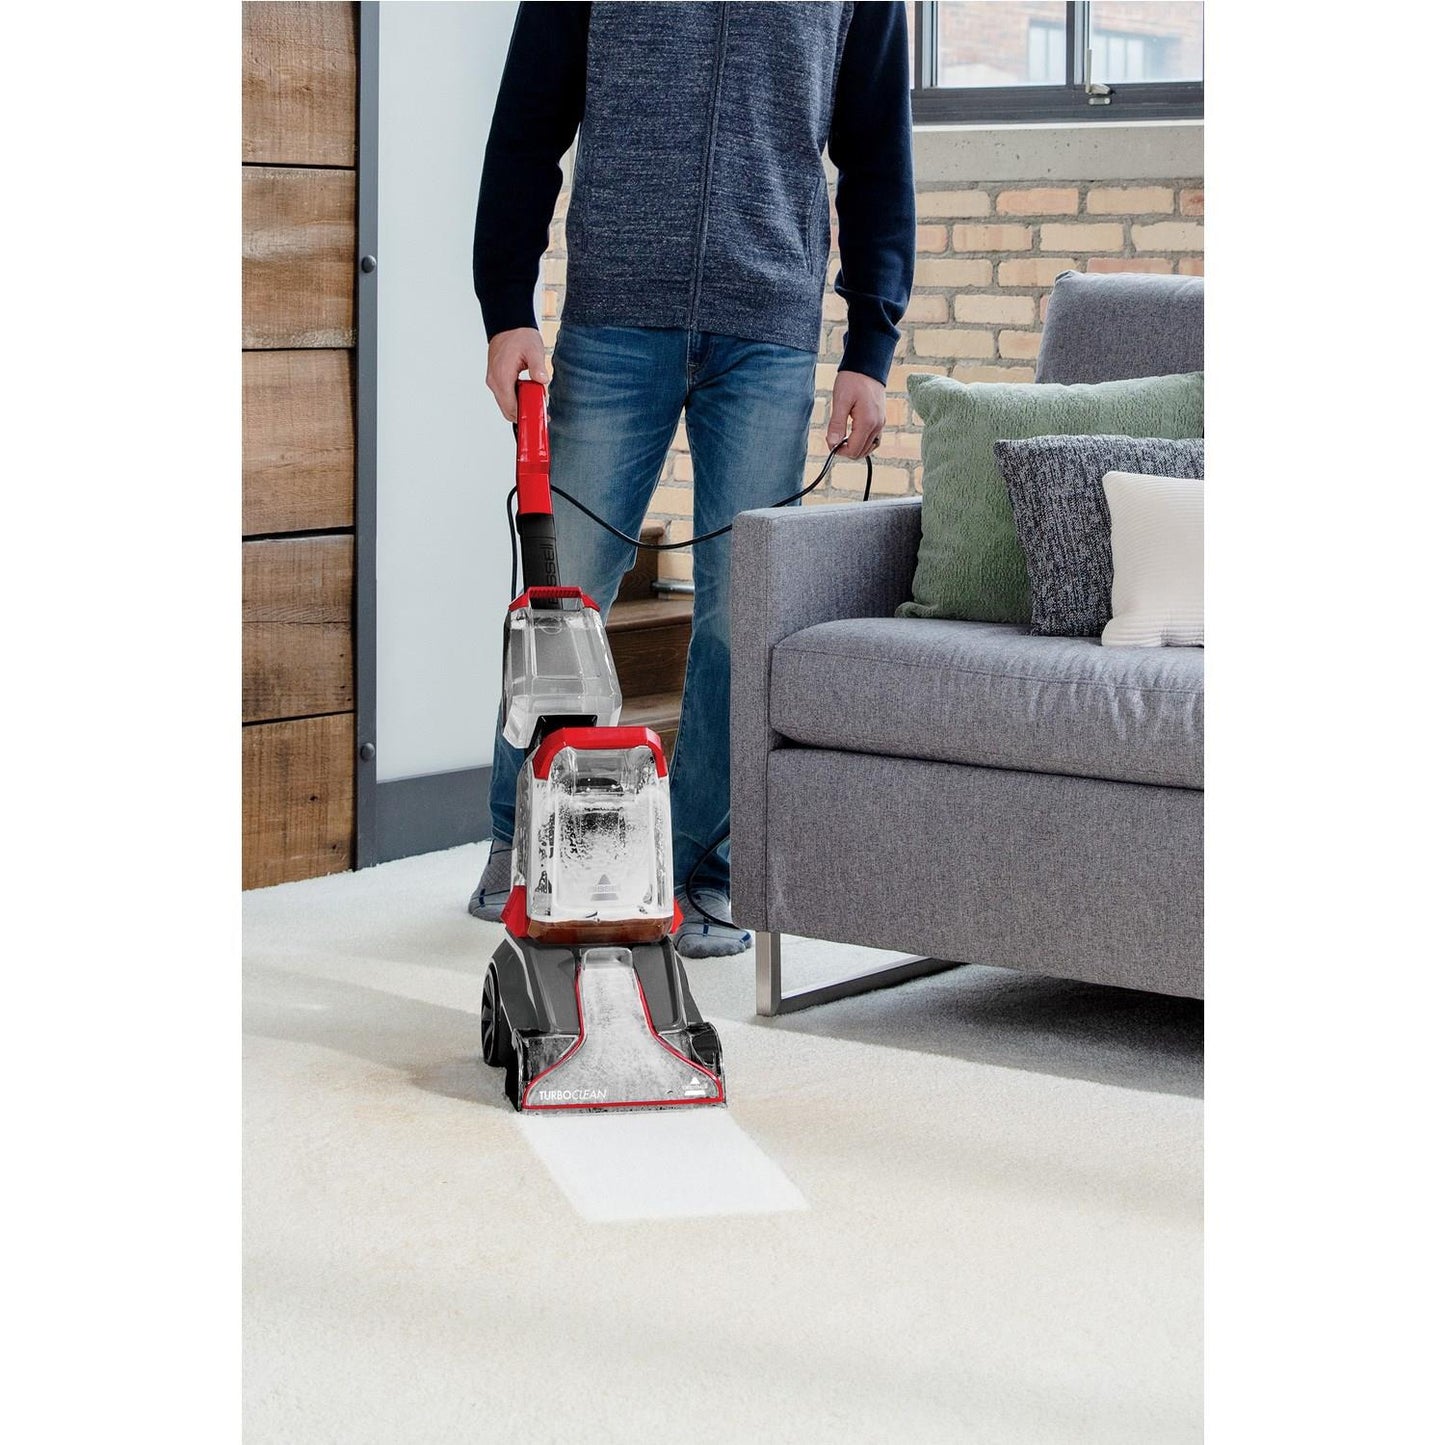 Bissell Powerclean 2889E Carpet Cleaner 600W 2.3L